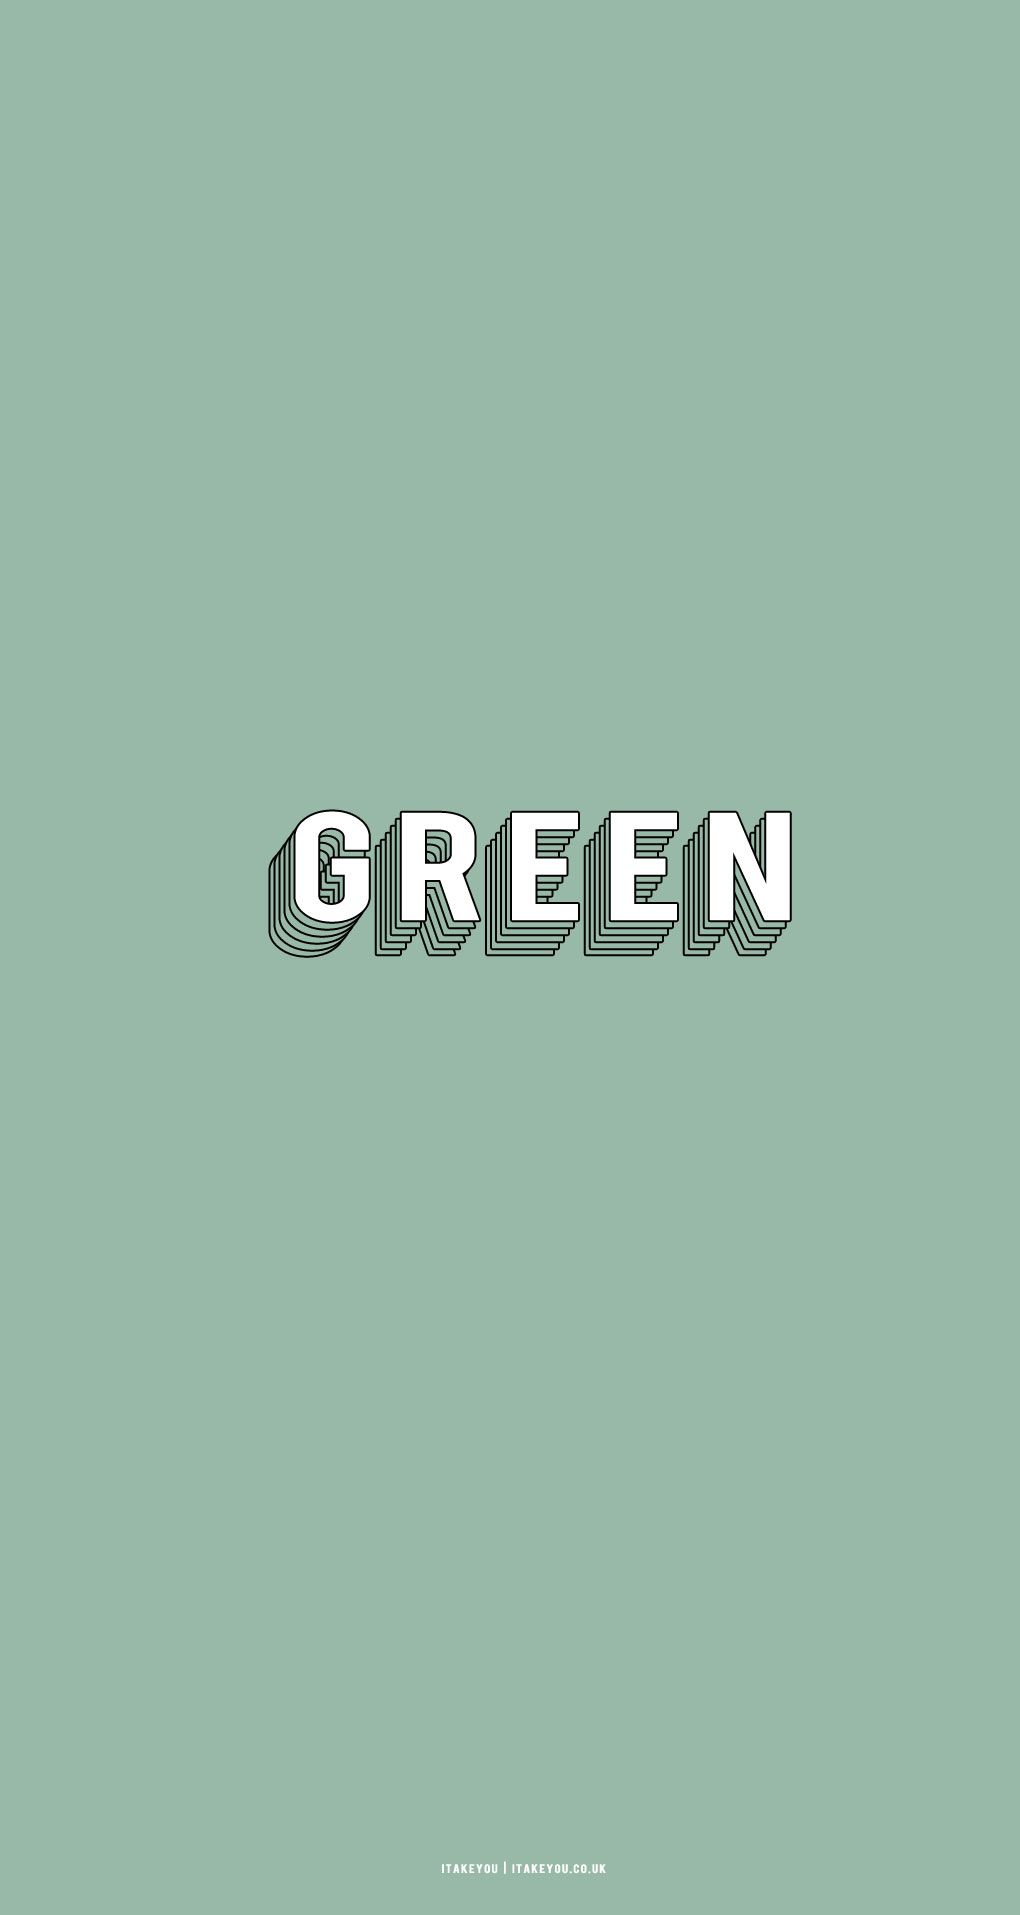 A green background with the word 'green' written on it - Sage green